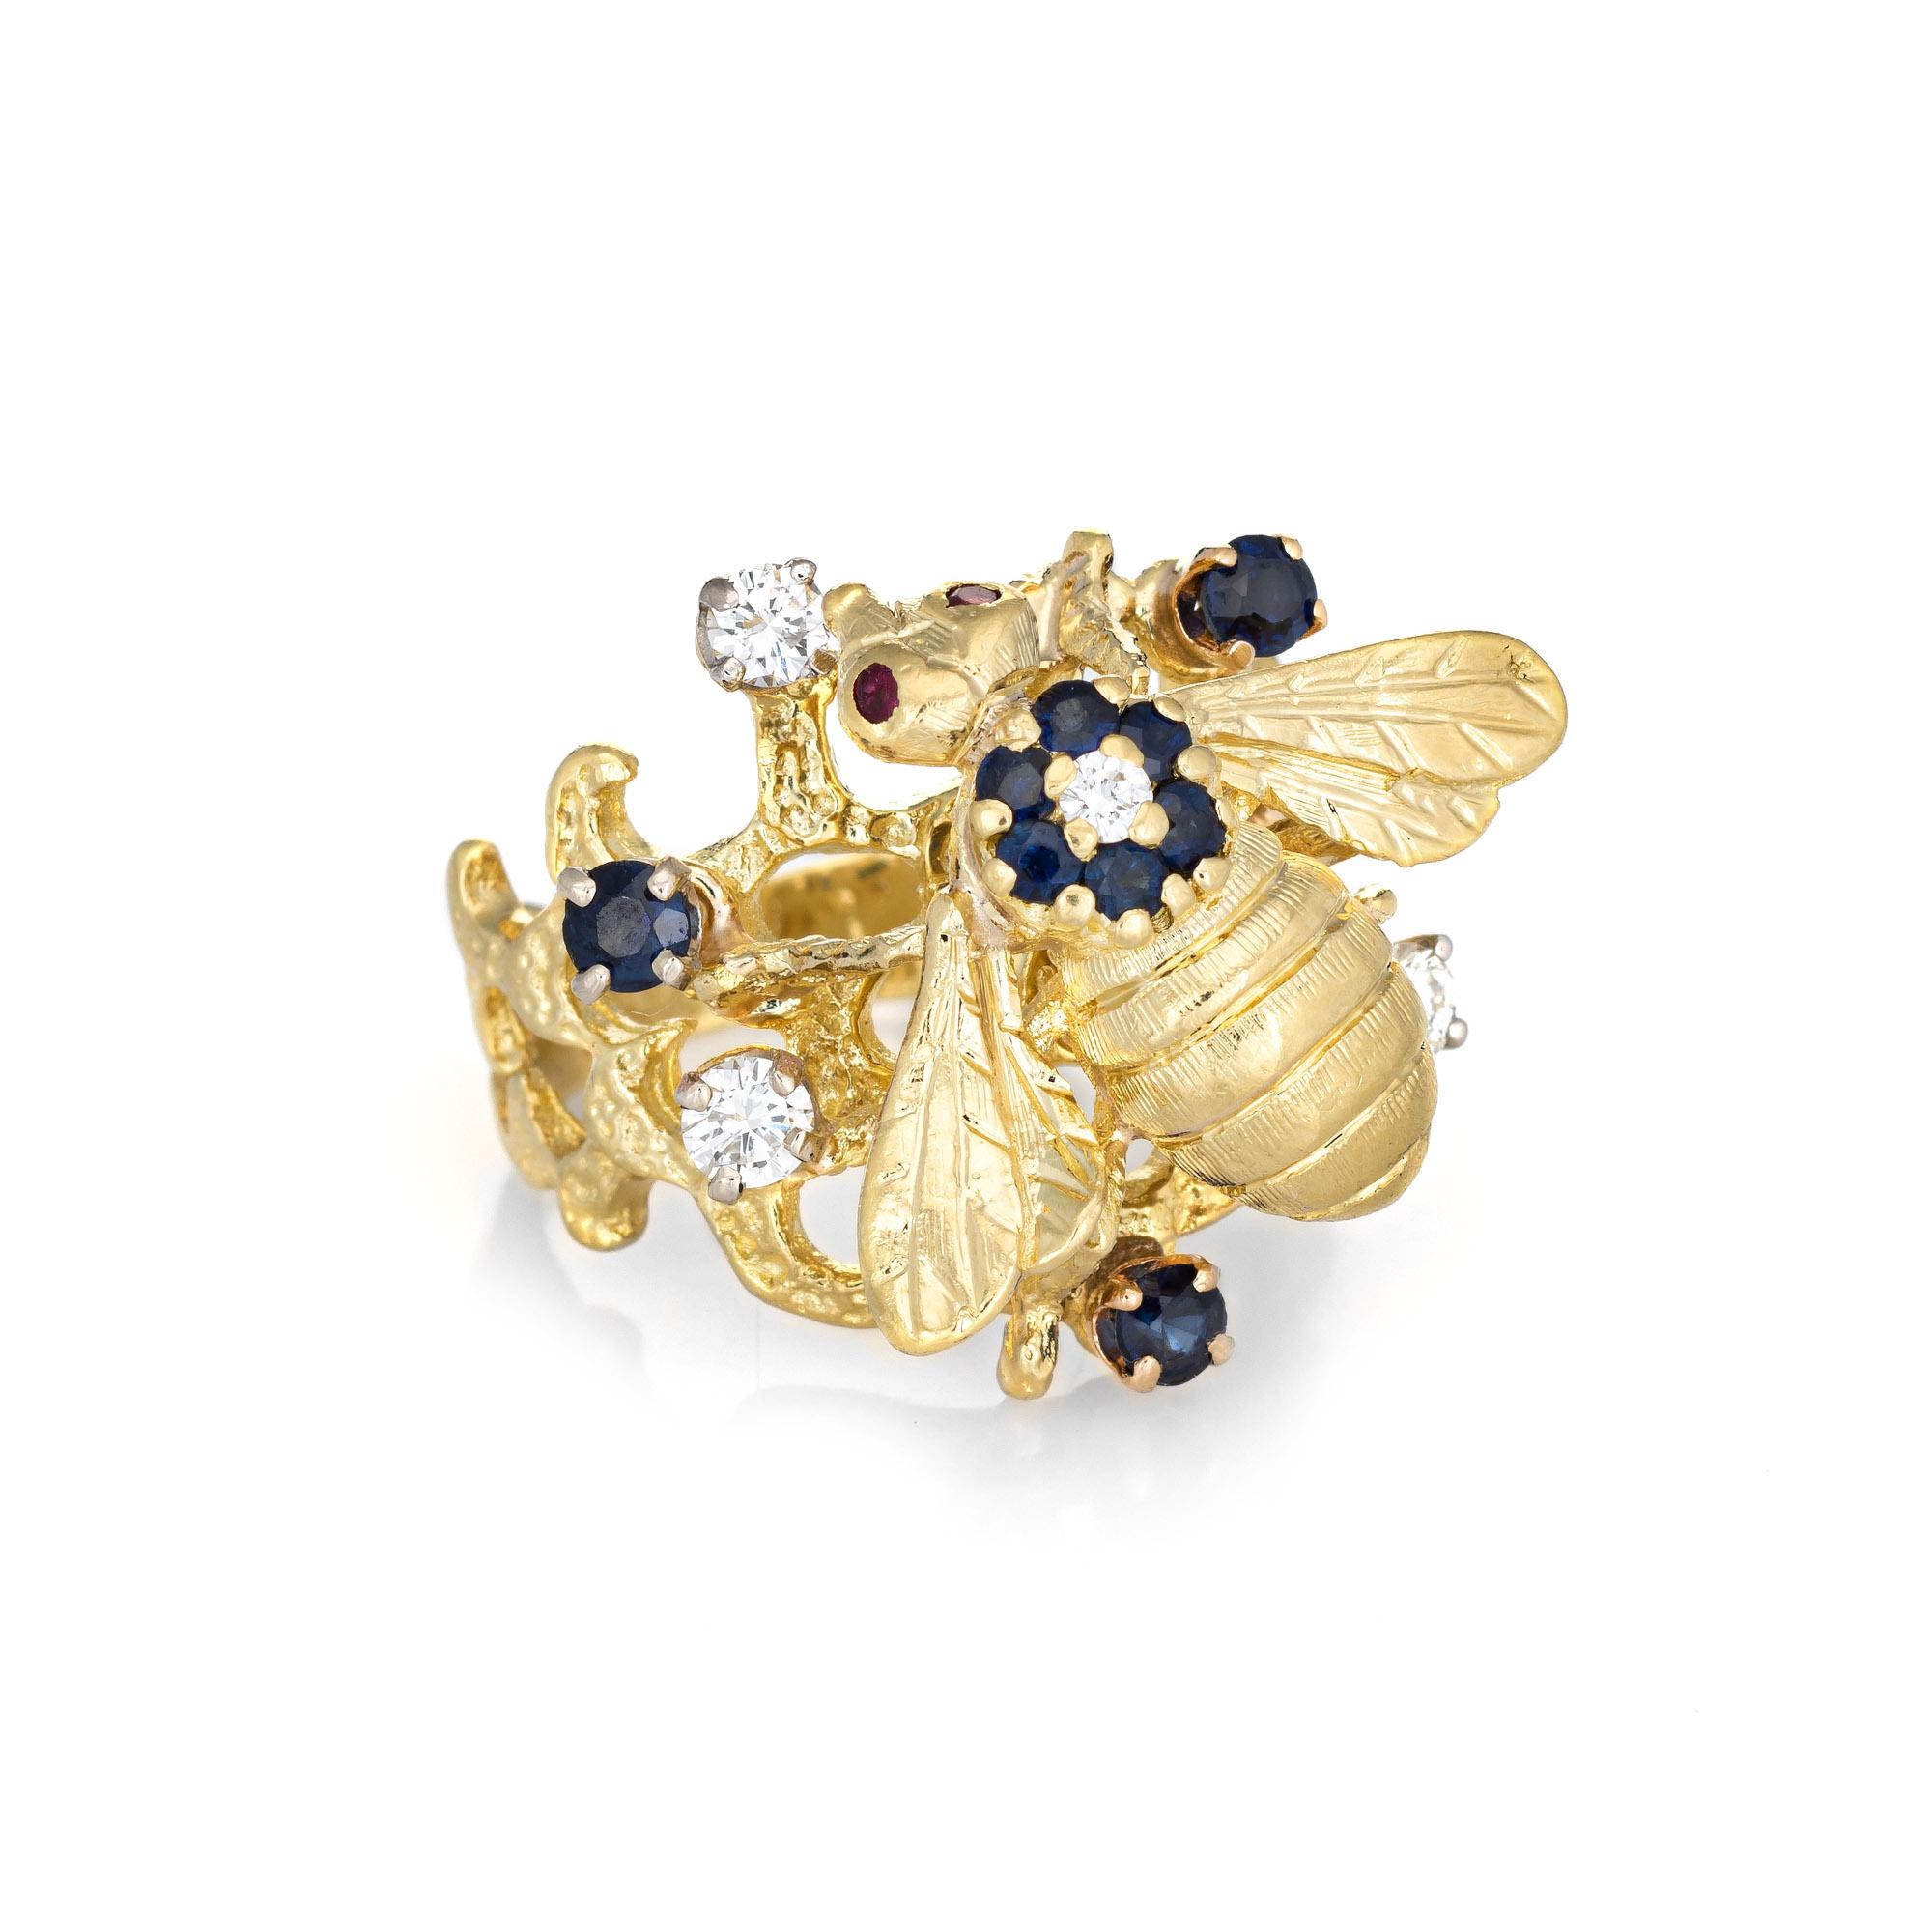 Stylish vintage diamond & sapphire bee ring (circa 1970s to 1980s) crafted in 18 karat yellow gold. 

Four diamonds are estimated at 0.05 carats each and total an estimated 0.20 carats (estimated at G-H color and VS2-SI1 clarity). The sapphires